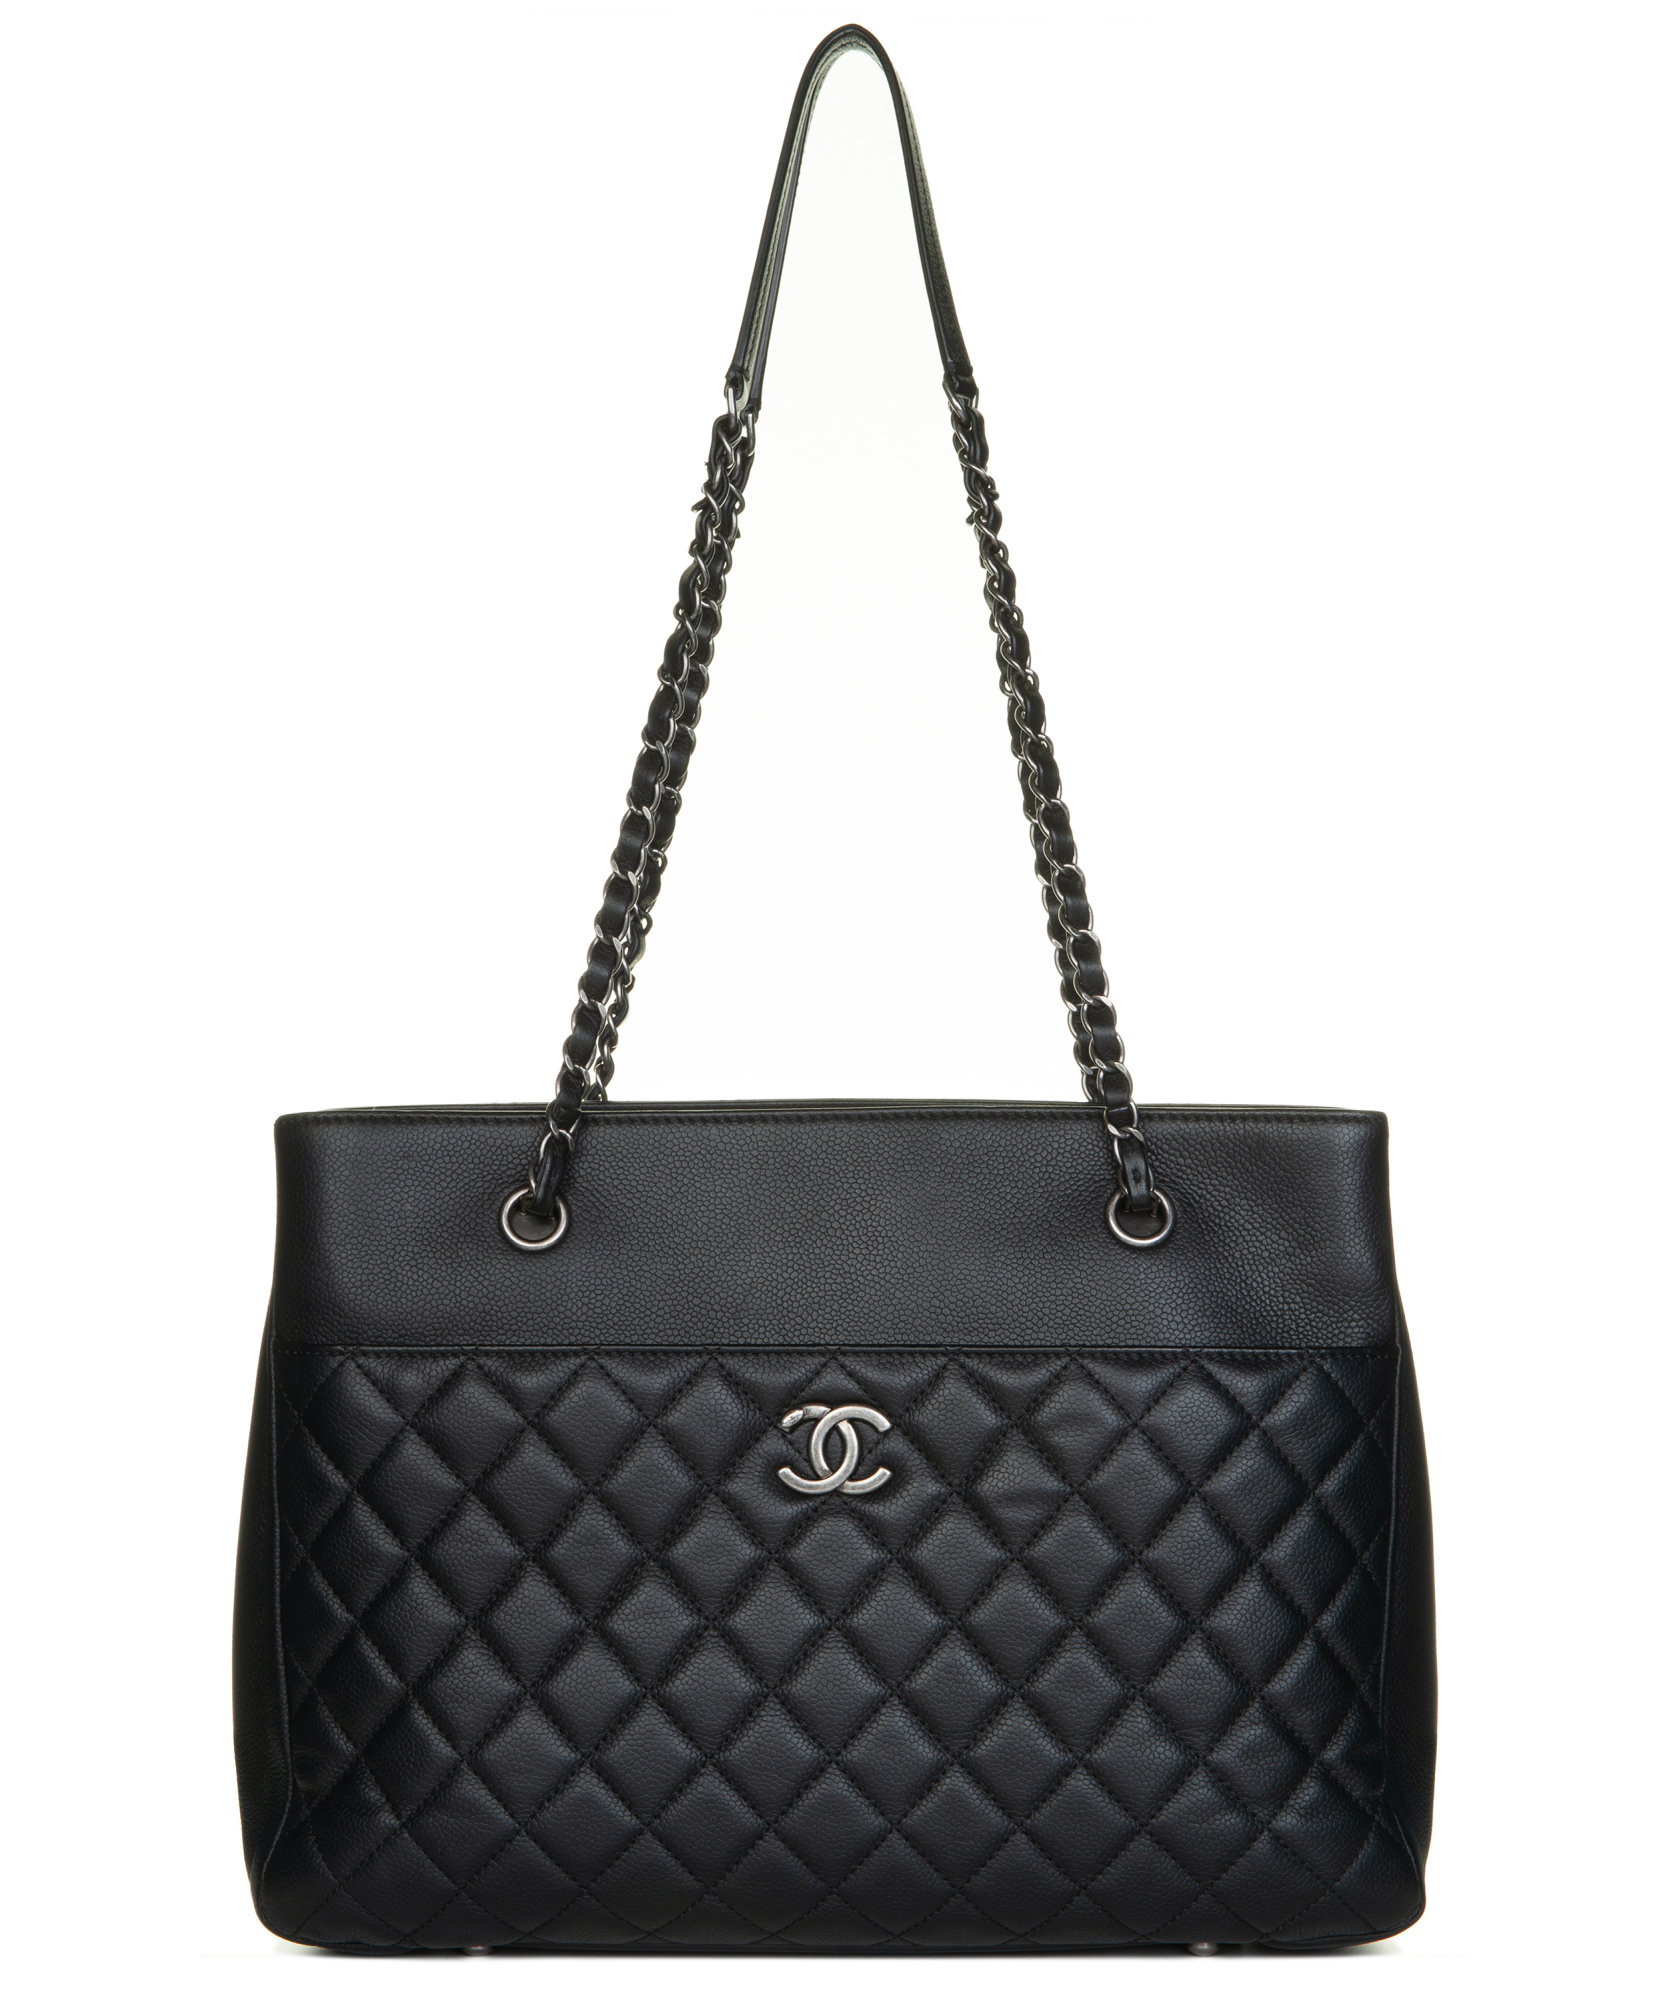 Urban Companion Shopping Tote Quilted Caviar Large Chanel La Doyenne